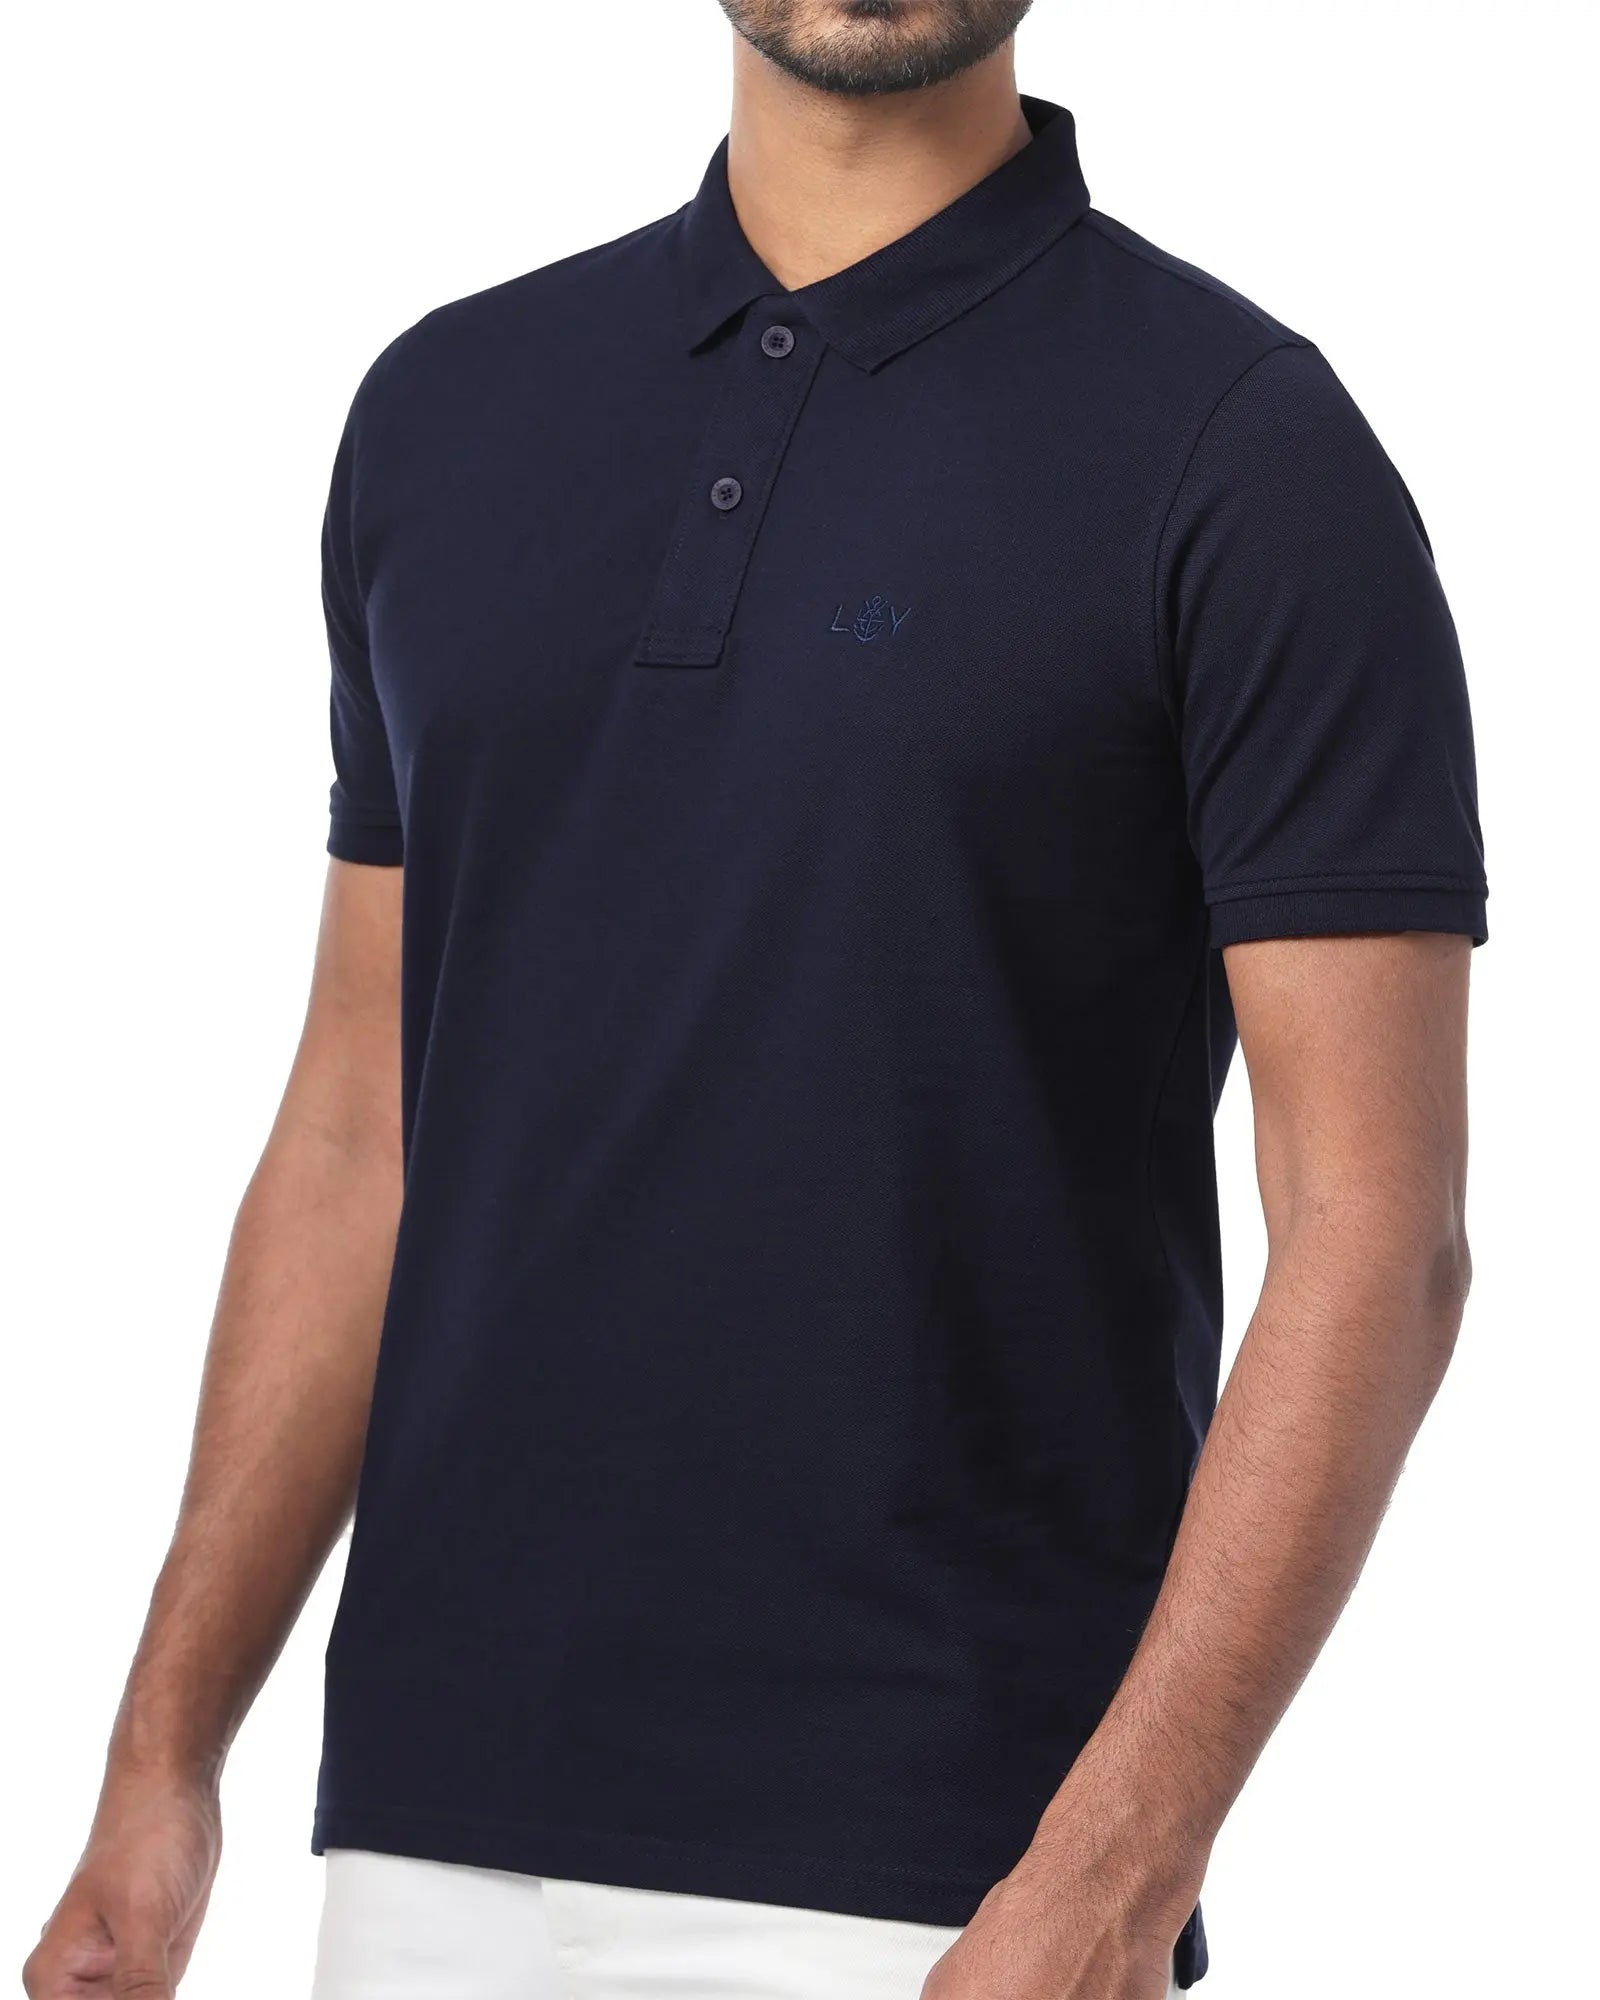 LCY London | Stand Up Basic - Men&#39;s Short Sleeved Polo LCY London